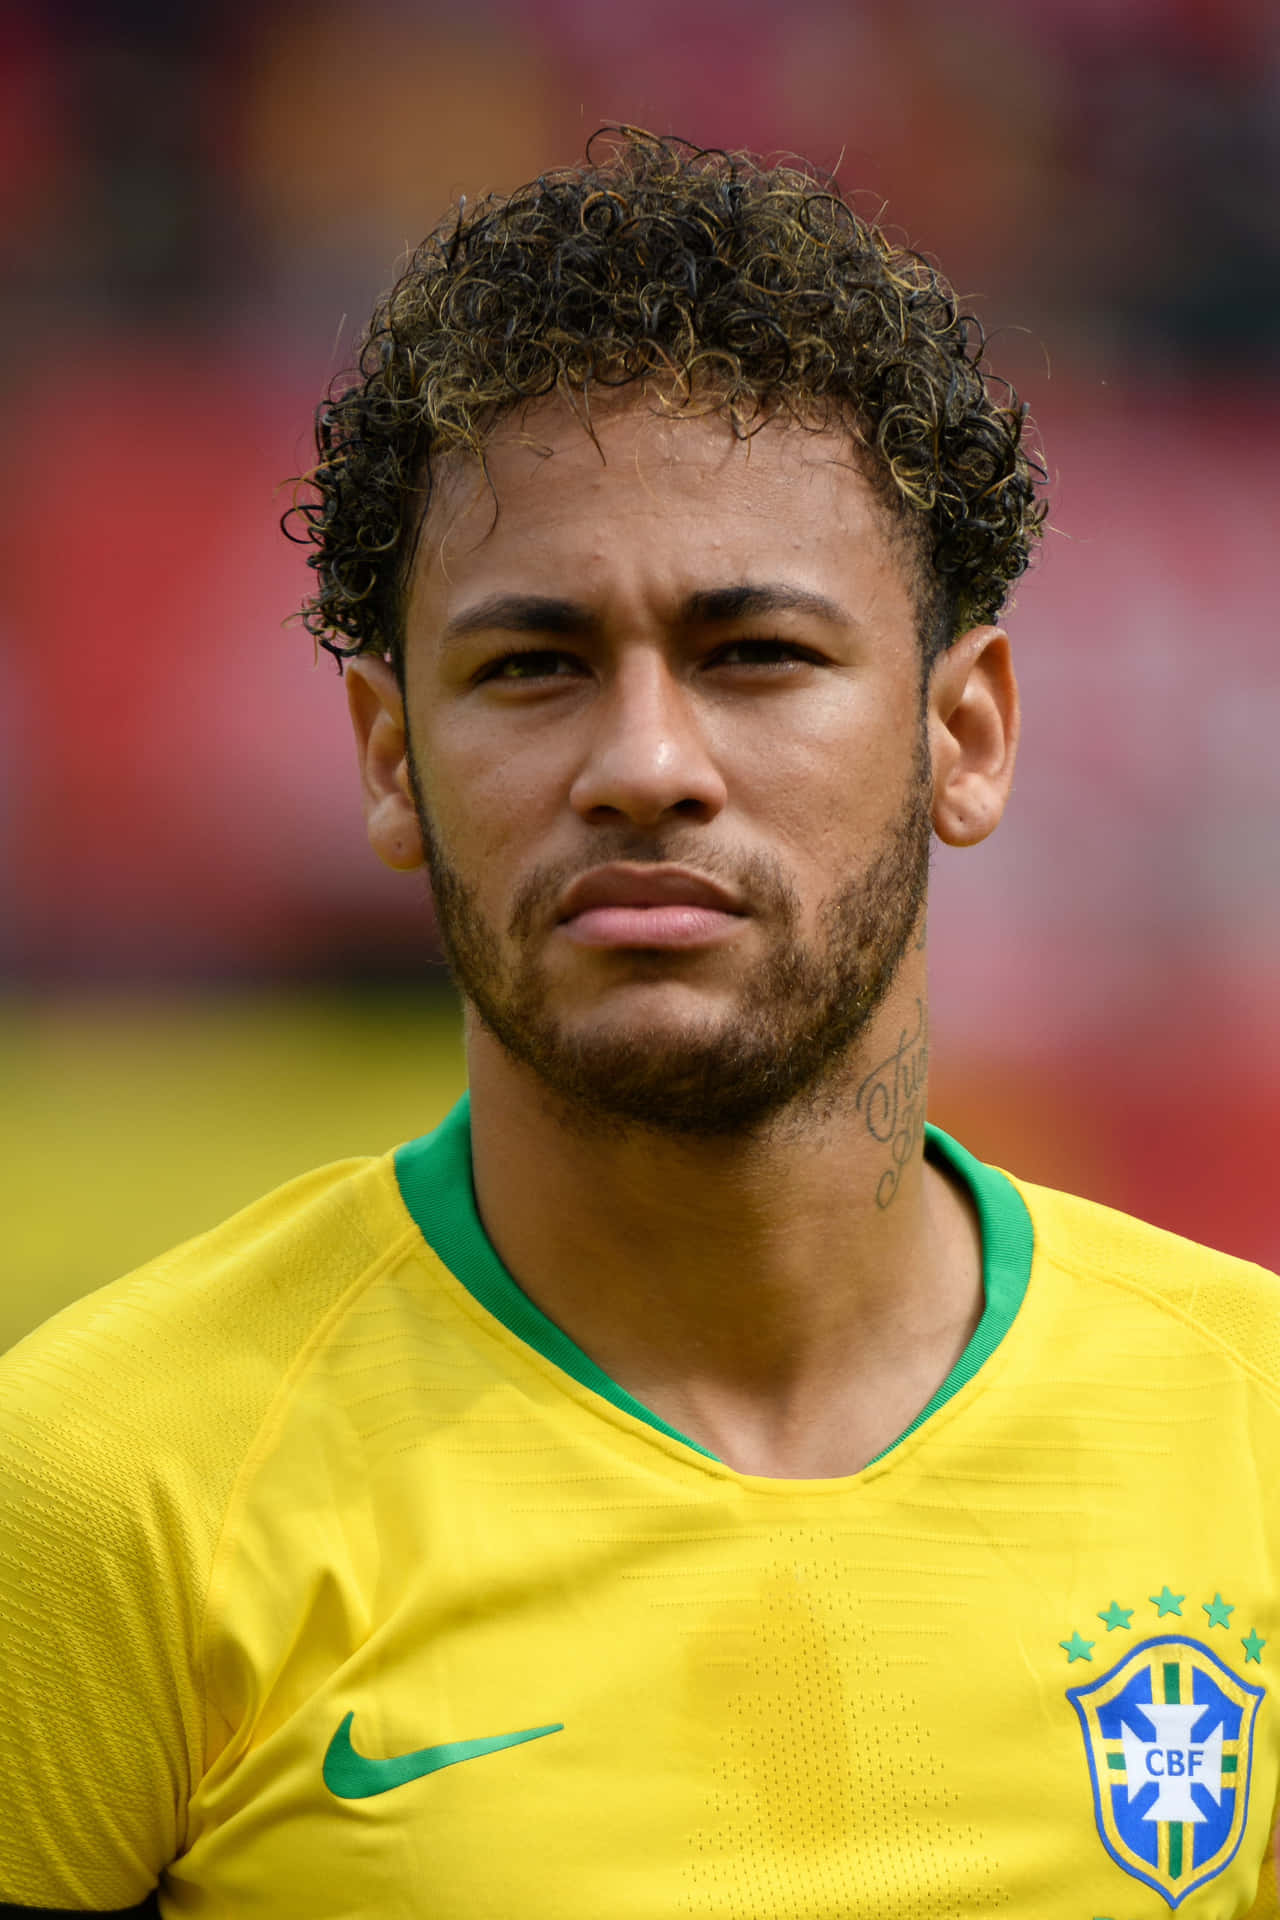 Download Neymar Jr In Action During A Game | Wallpapers.com